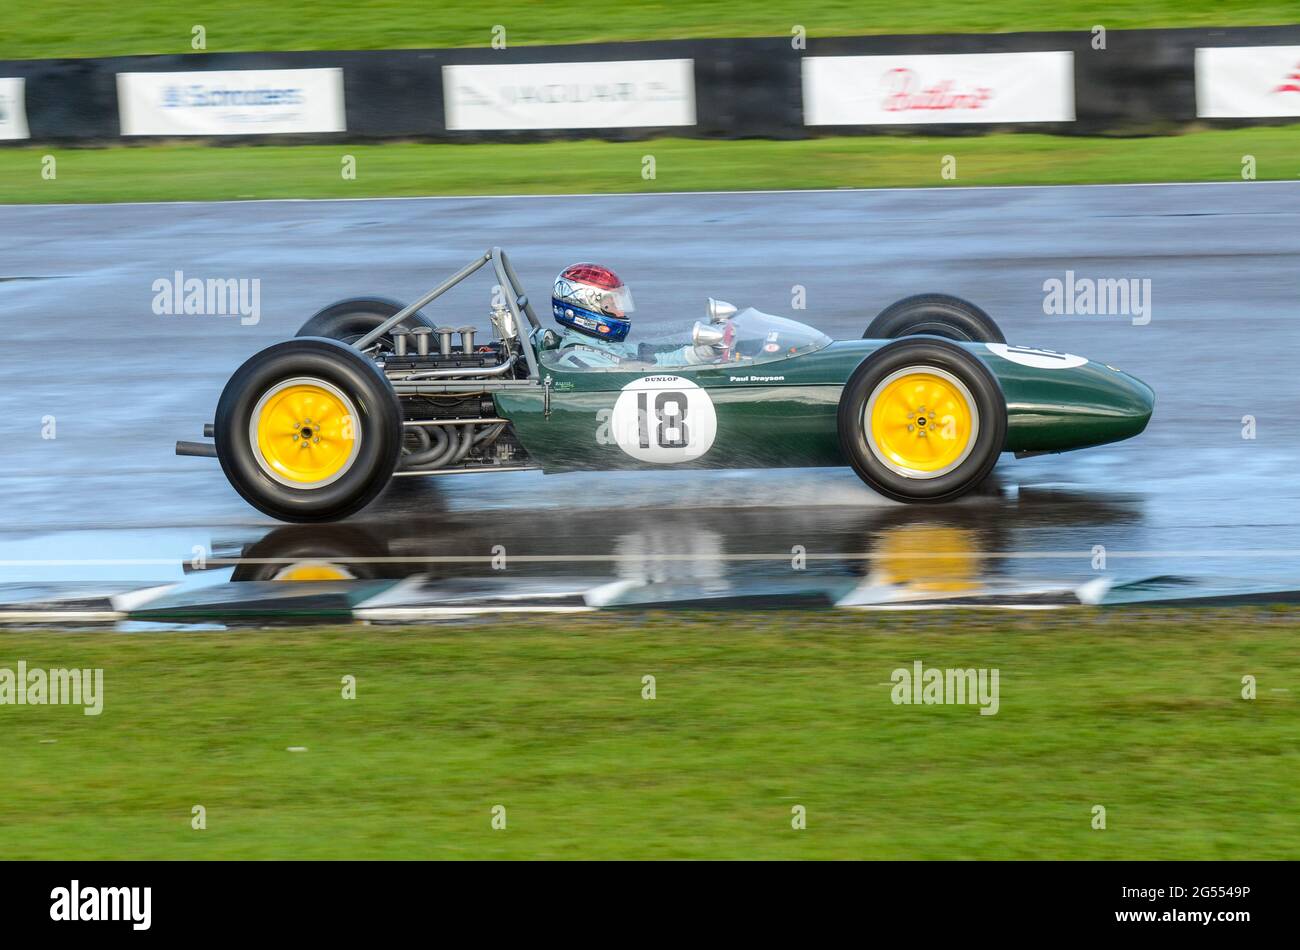 Classic Lotus BRM 24 racing car racing in the Glover Trophy at the Goodwood Revival 2011, on a wet track after rain. Vintage Grand Prix car Stock Photo